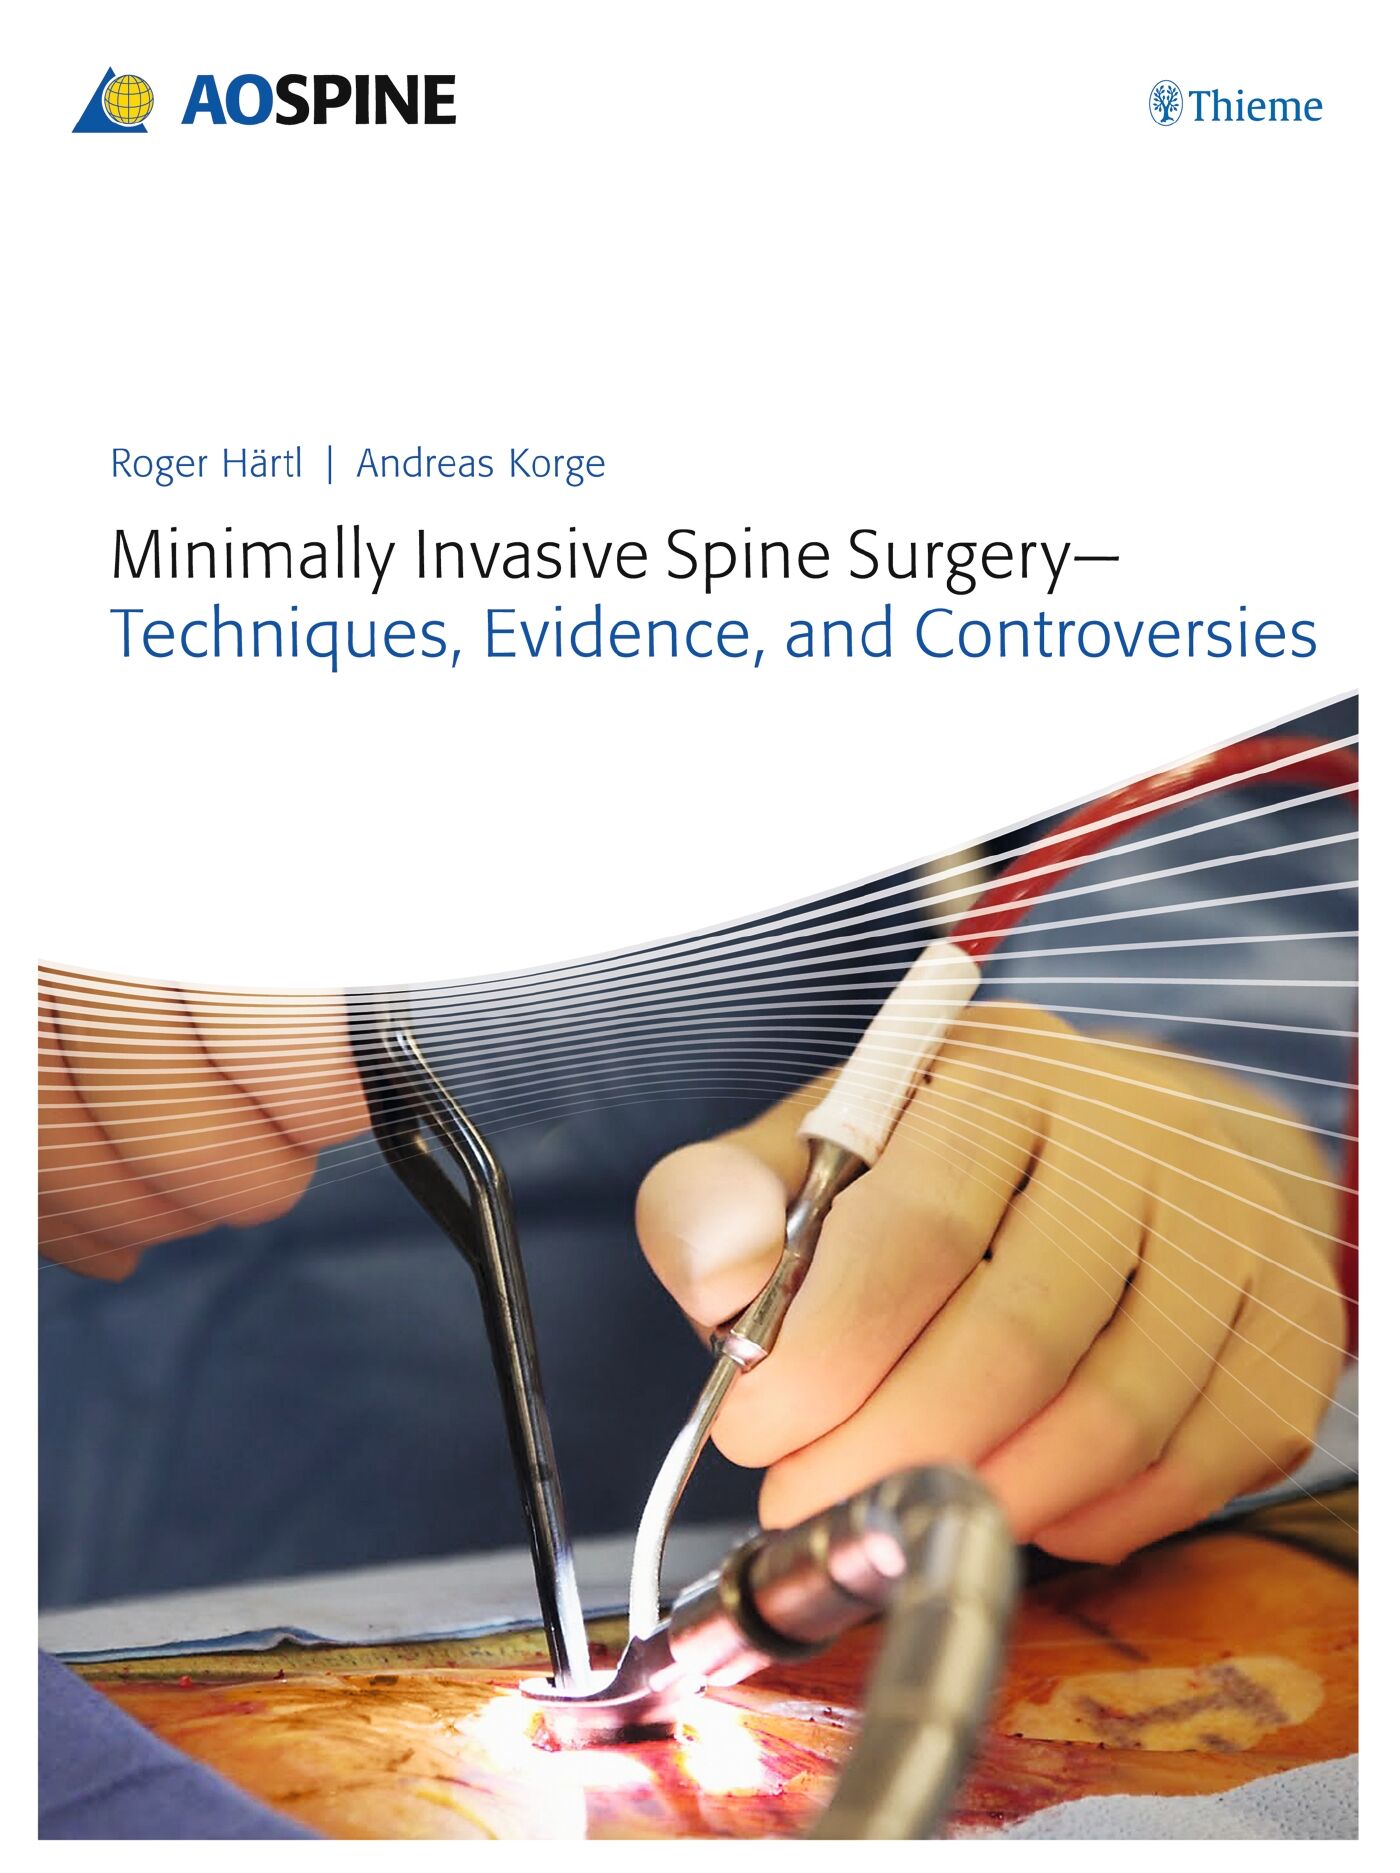 Minimally Invasive Spine Surgery - Techniques, Evidence, and Controversies, 9783131723819